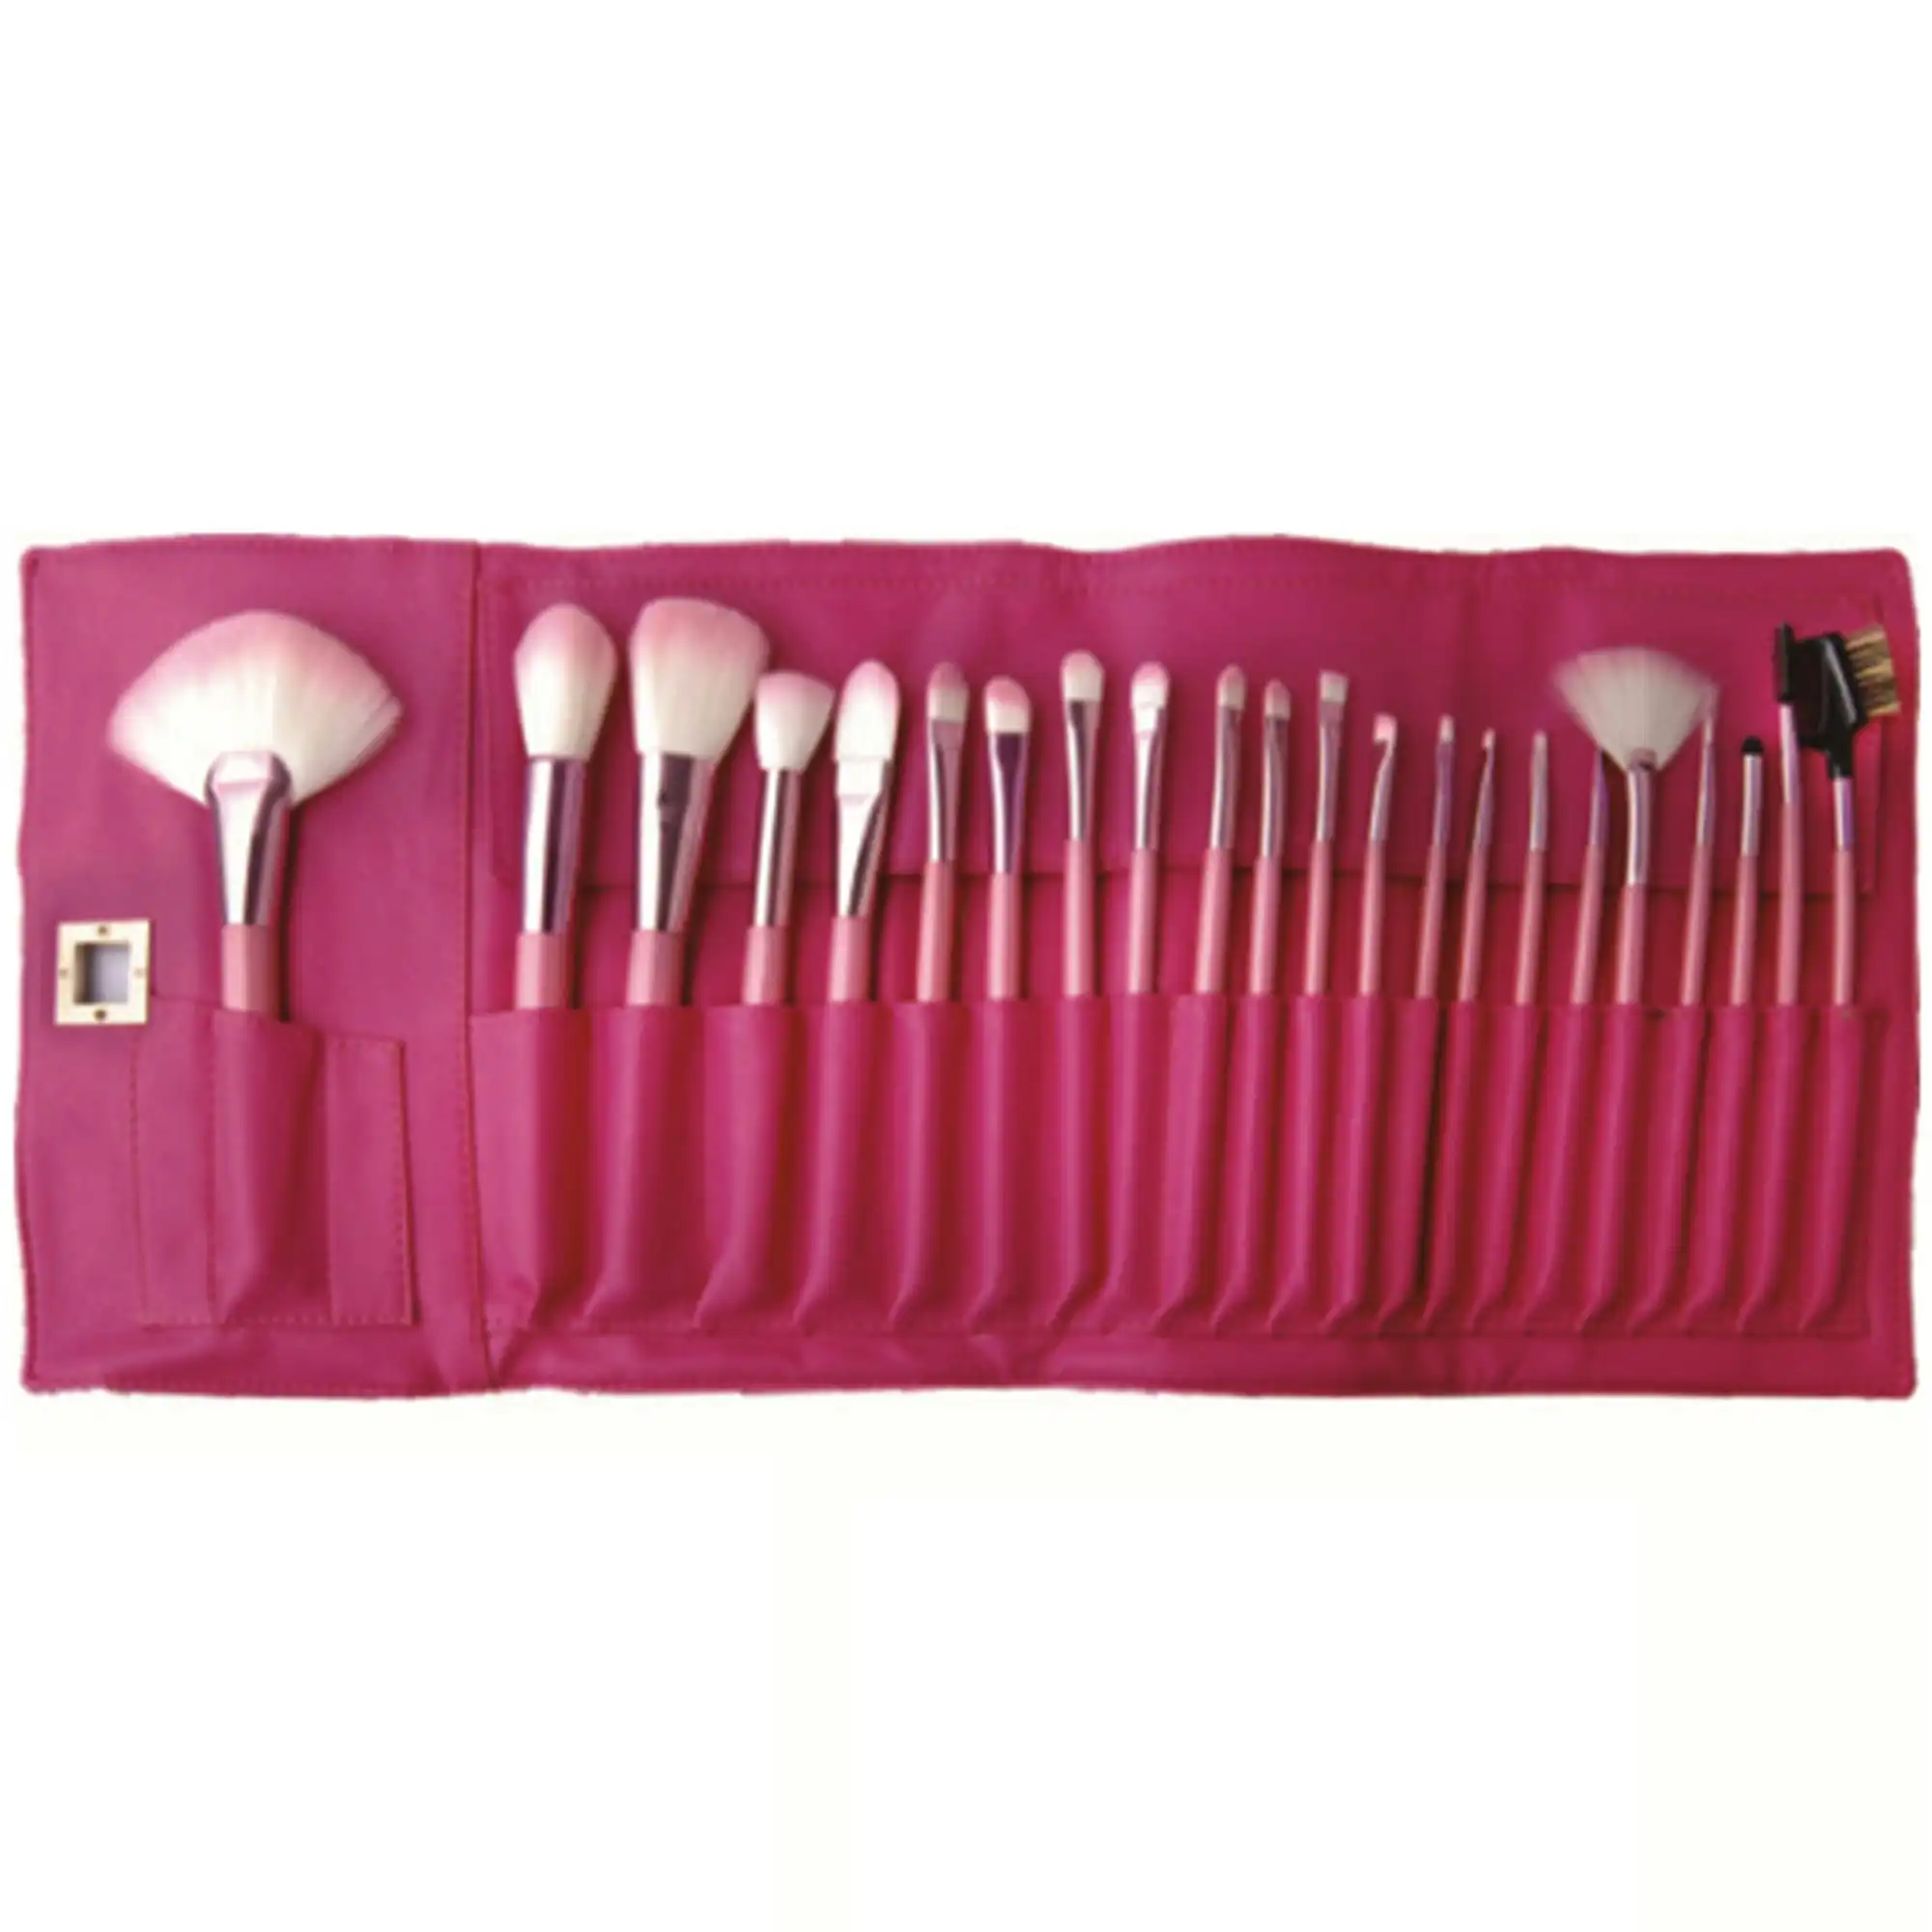 22 Piece Professional Makeup Brush Set Soft Bristle Multipurpose with Carry Case Pink